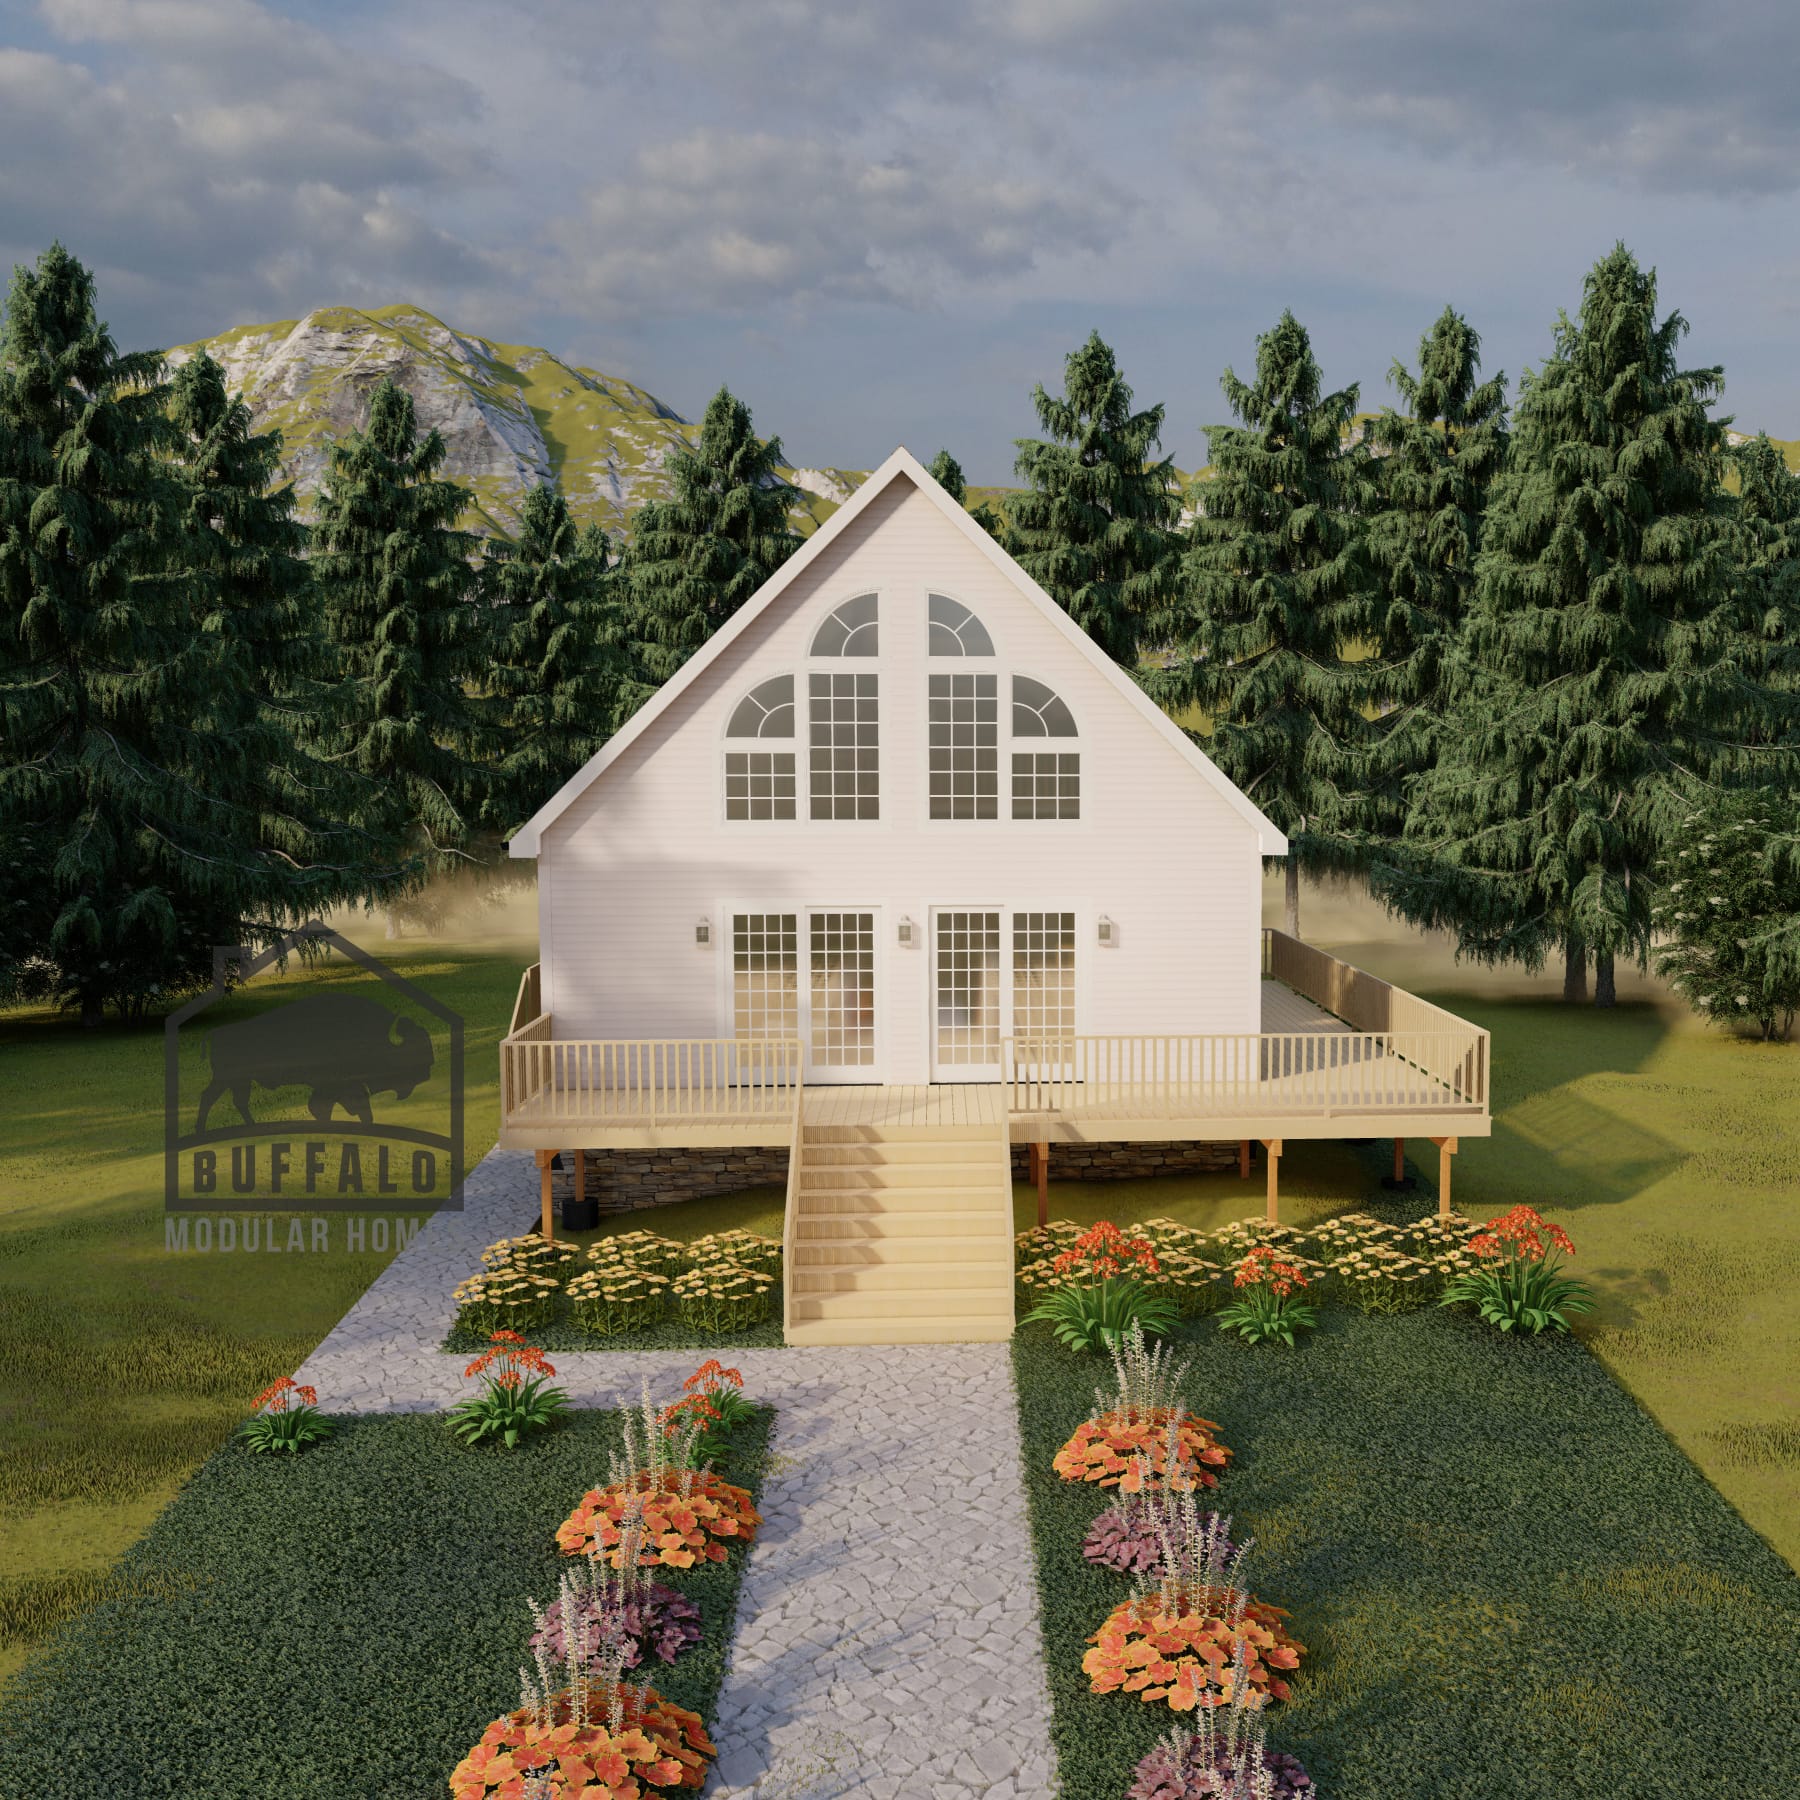 Bayview chalet - front elevation 5w